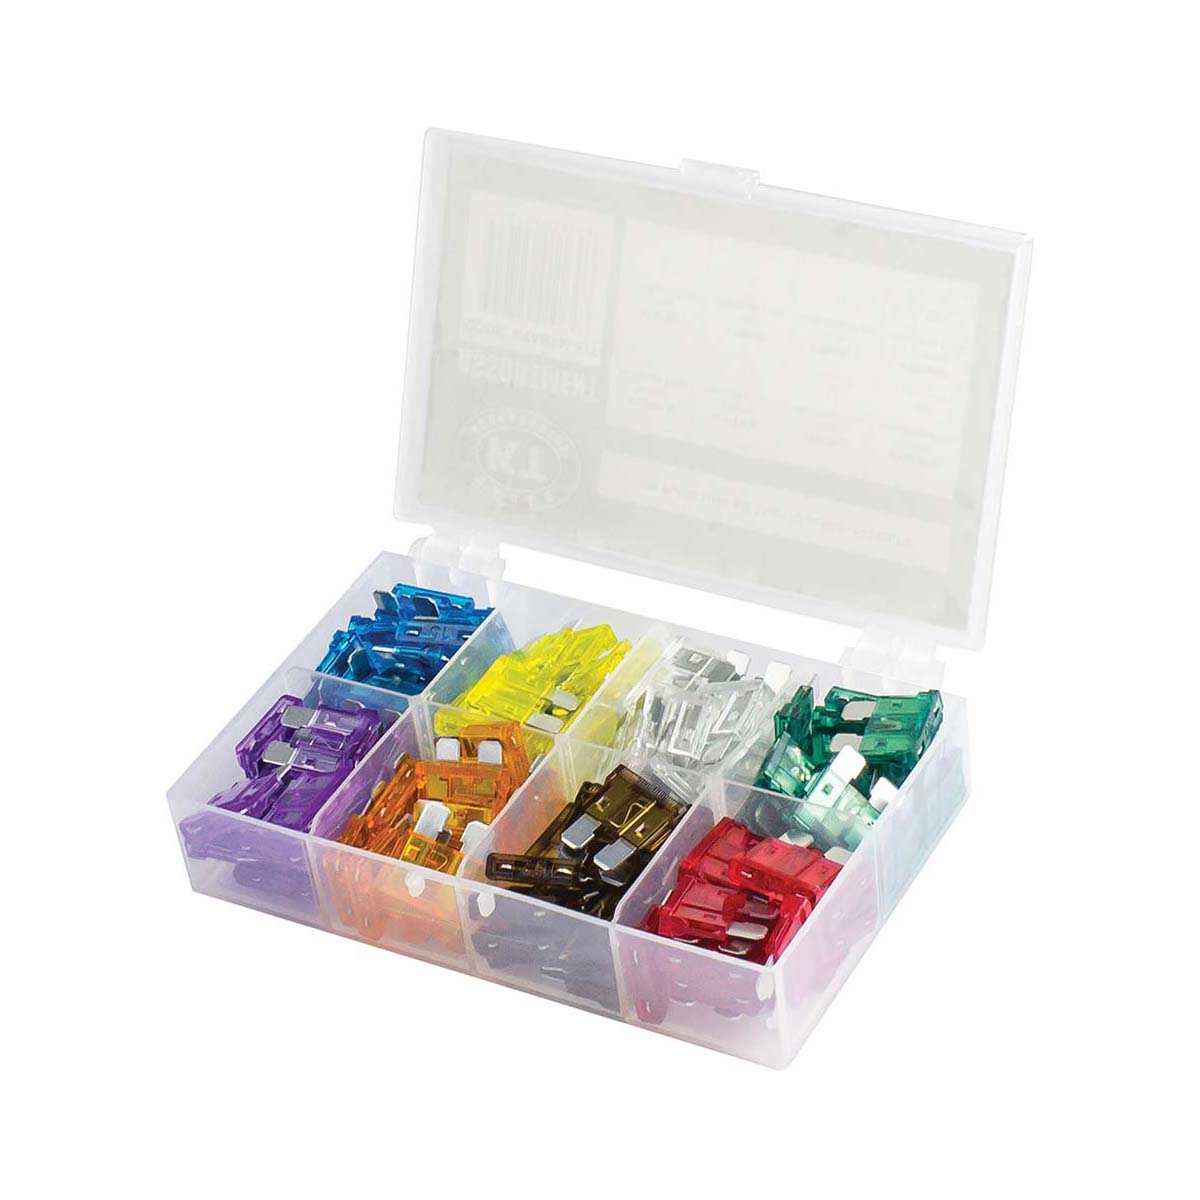 KT Cables Blade Fuse Kit, Assorted, 120 Pieces